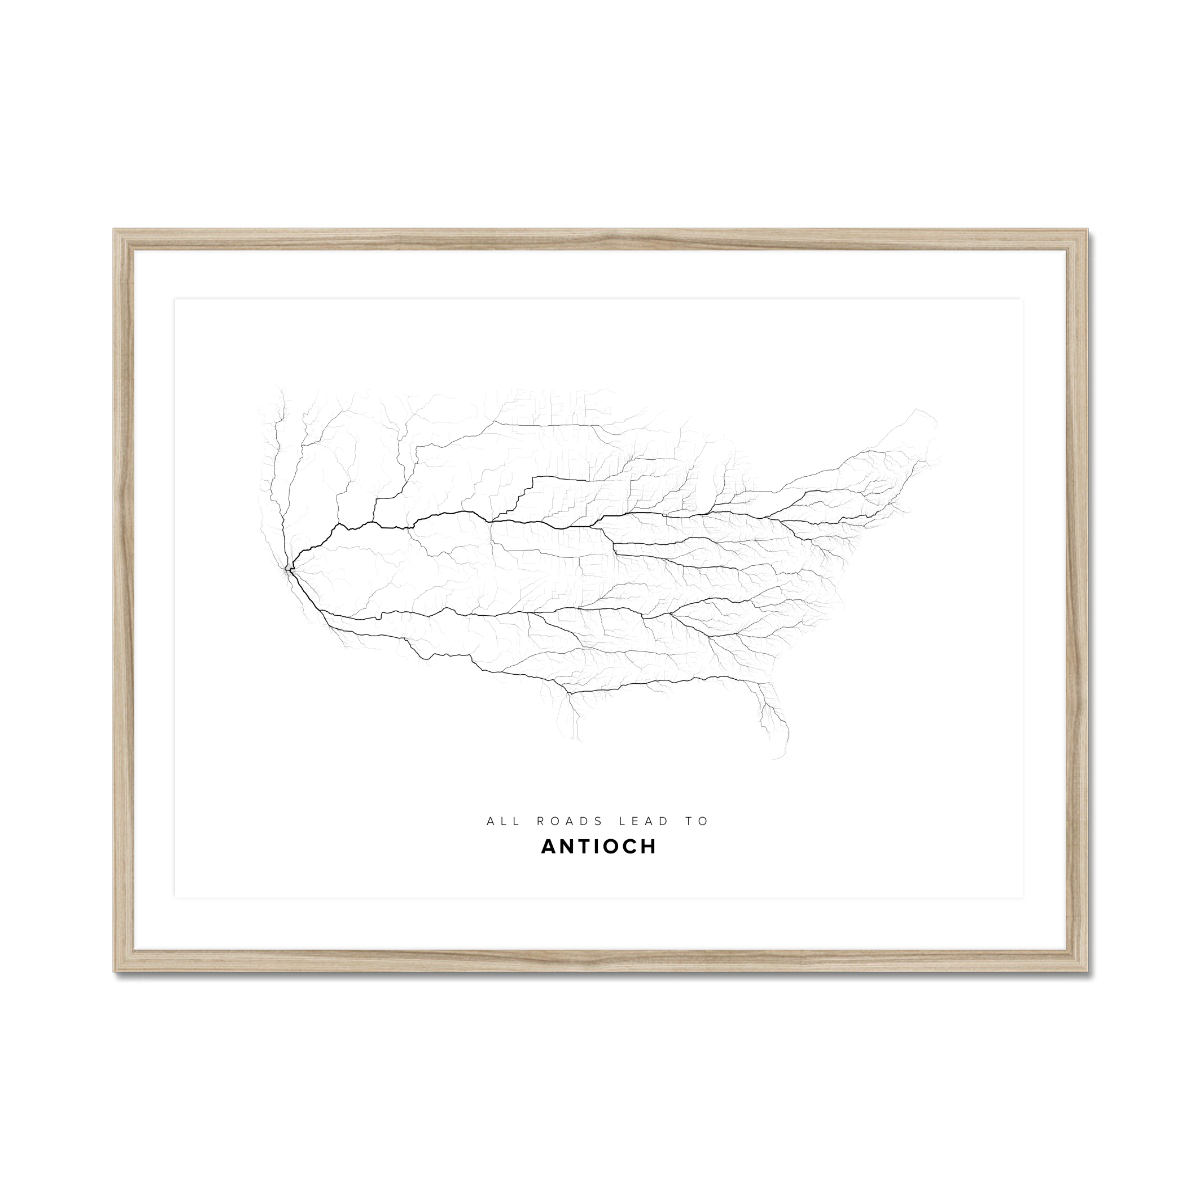 All roads lead to Antioch (United States of America) Fine Art Map Print